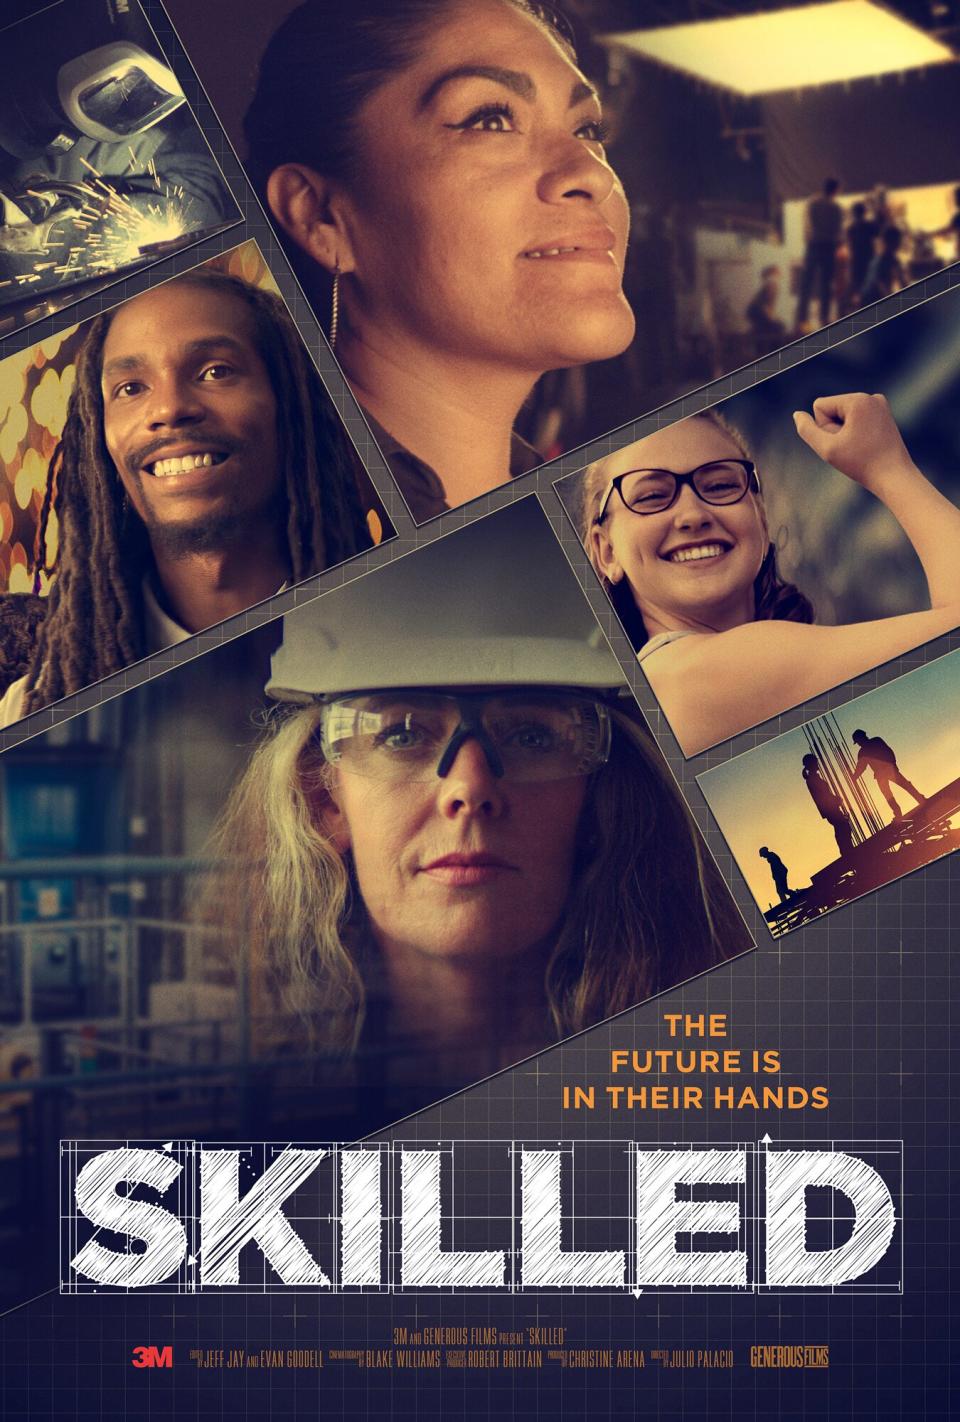 Vivica Fox is 'Honored' to Host Sundance World Premiere Screening of Skilled: See the Trailer